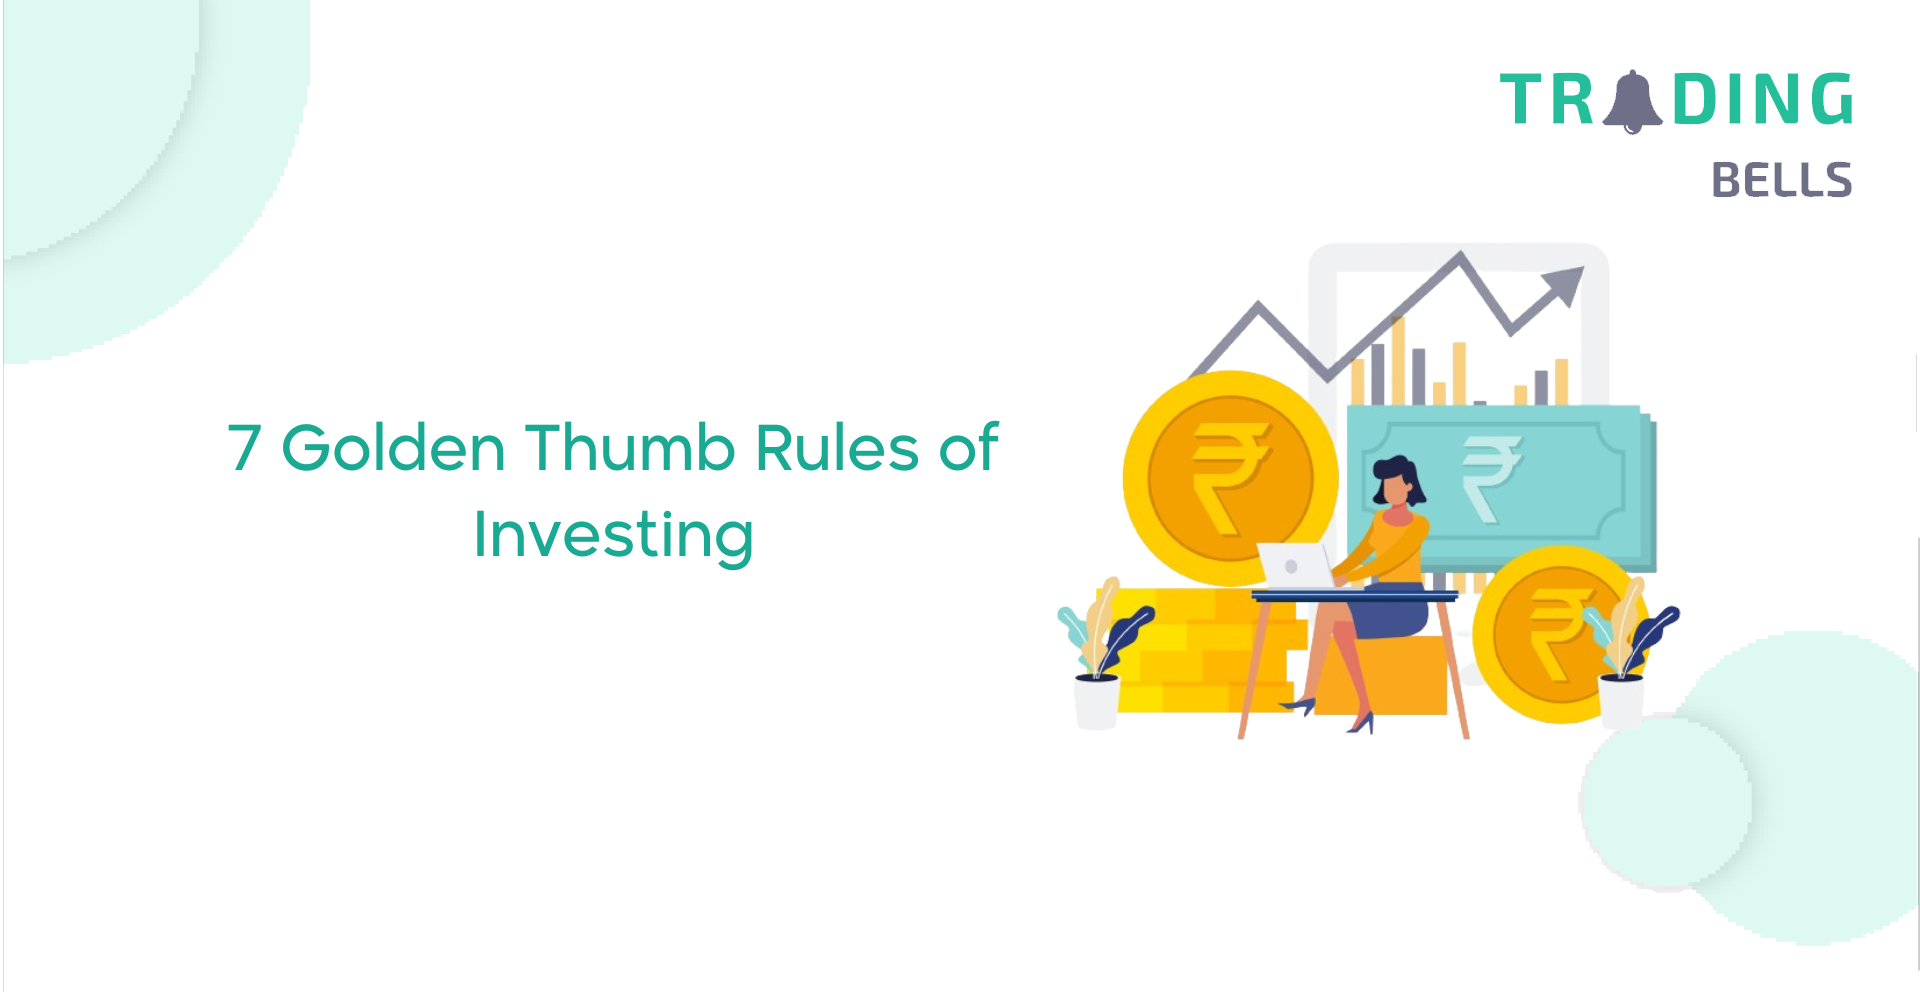 Rules of Investing